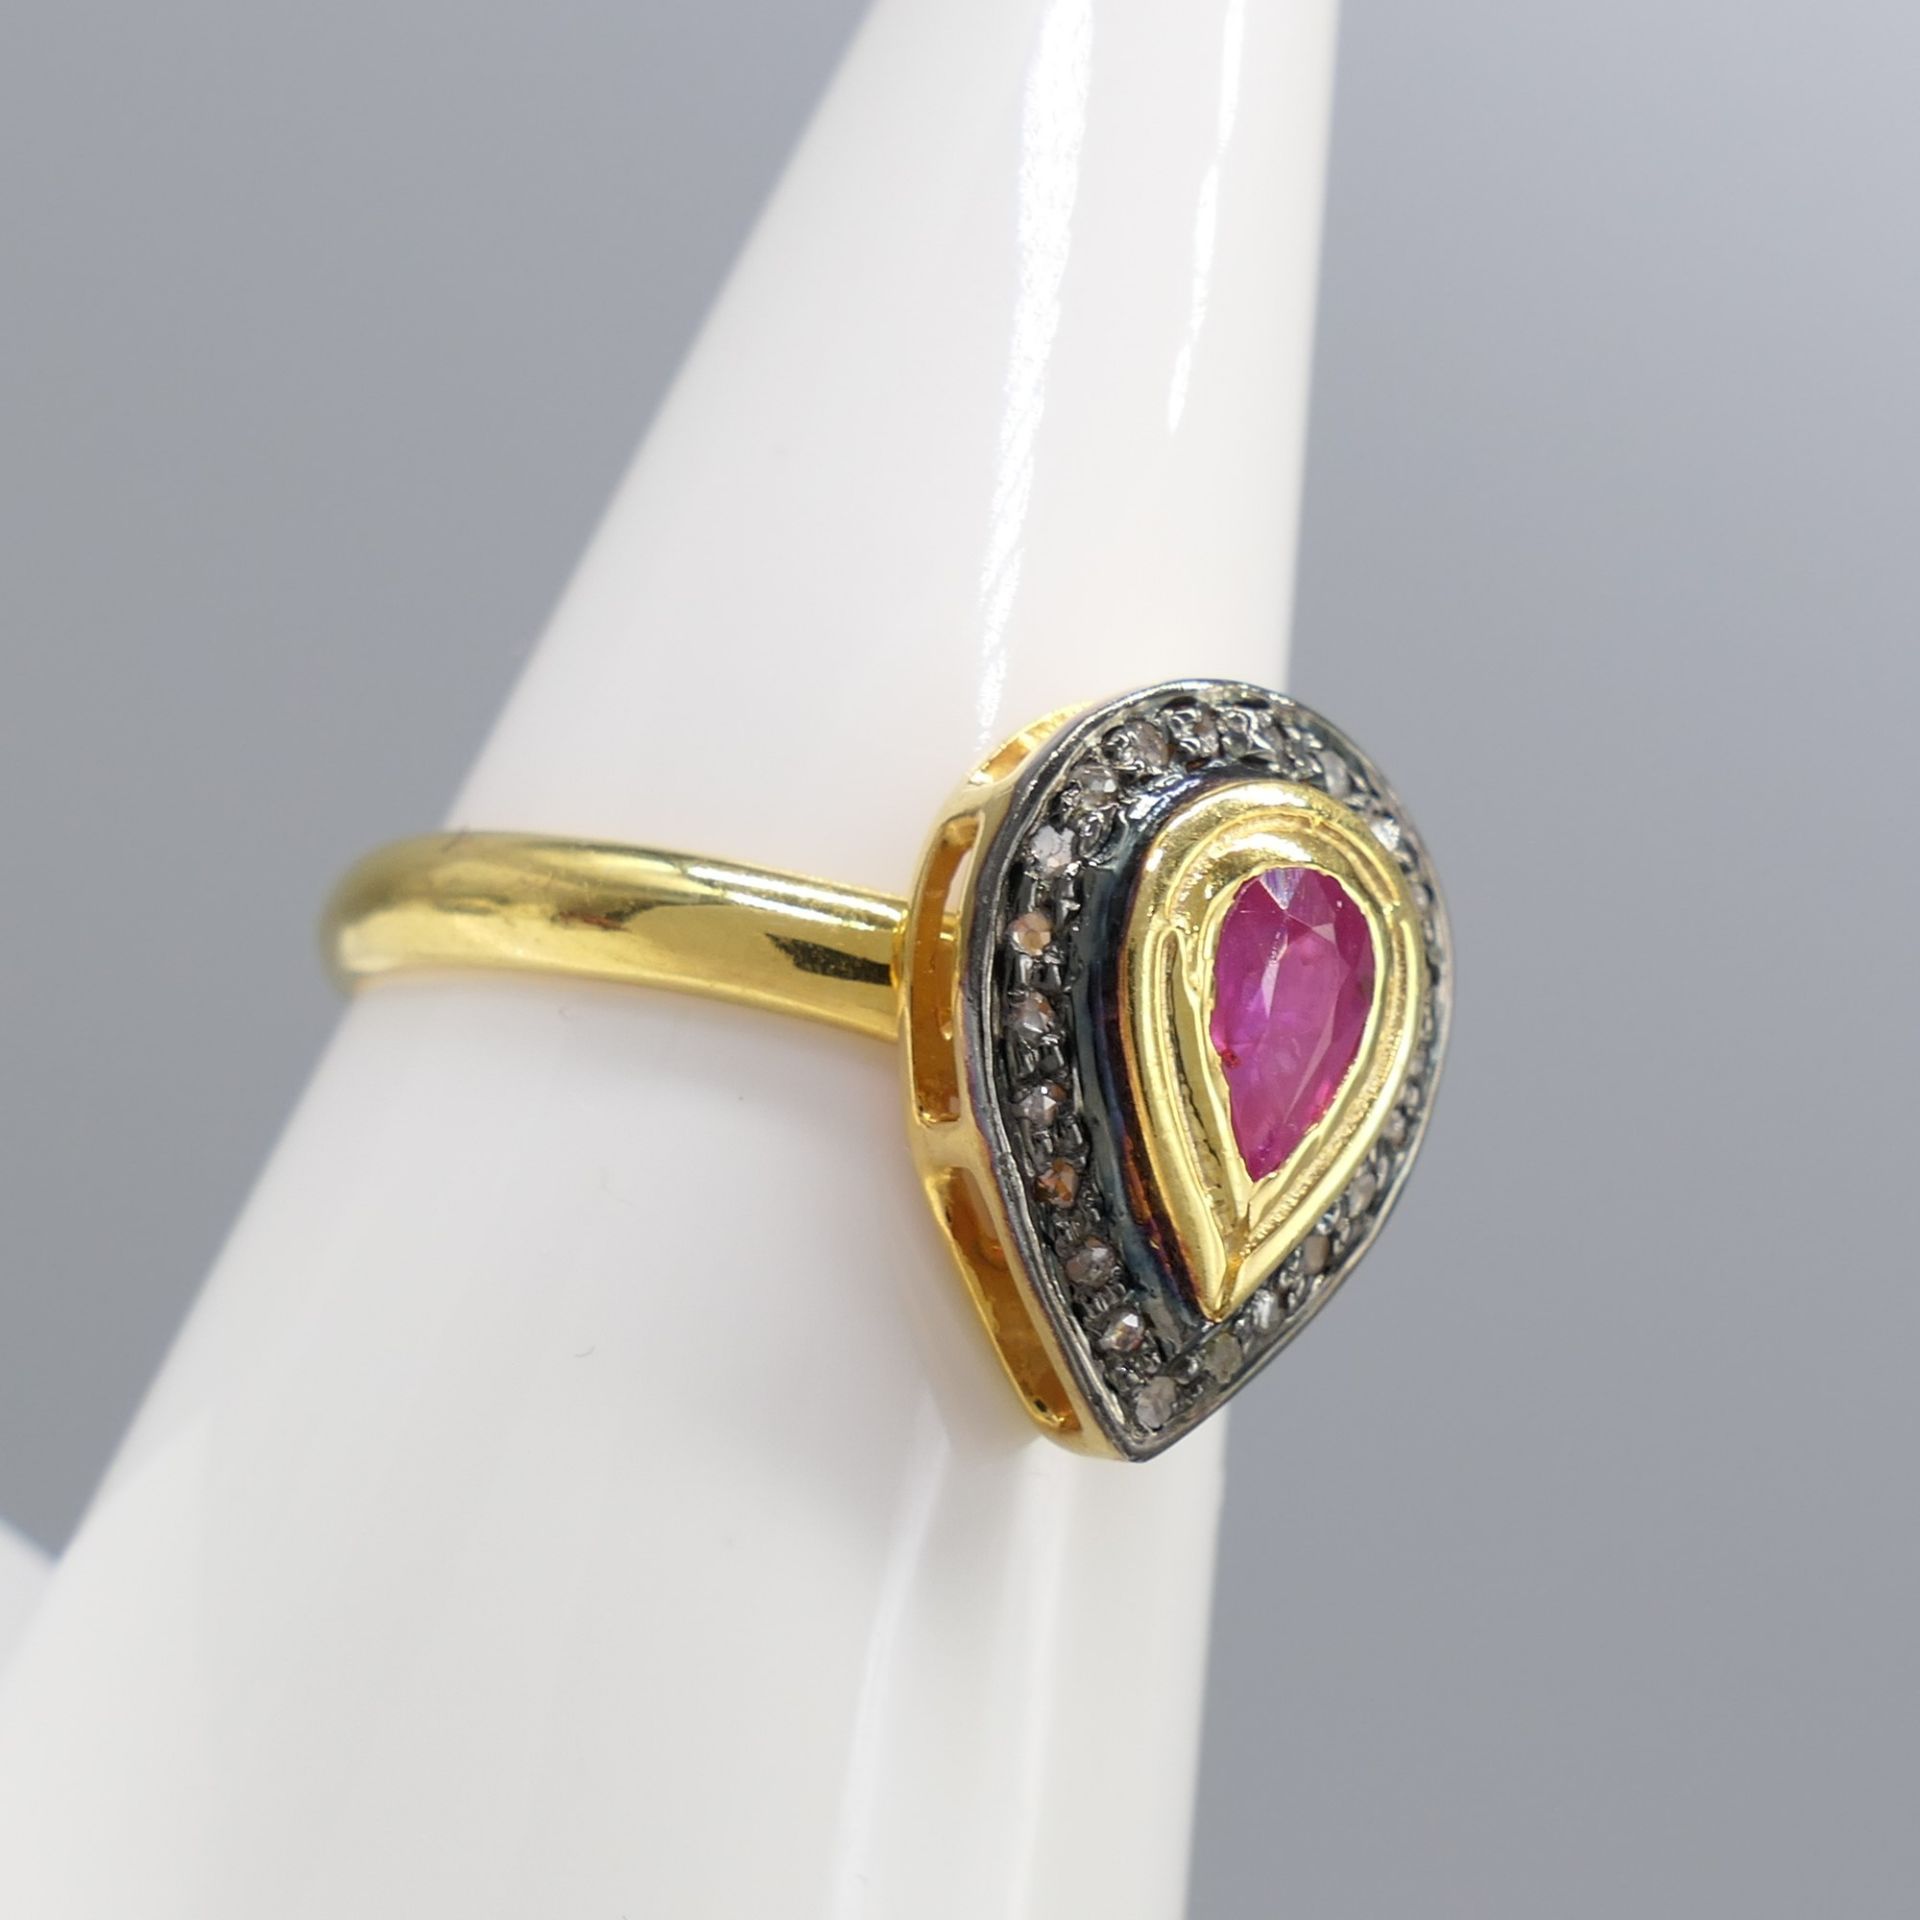 Hand-Made Silver Gilt Ring Set With Ruby and Diamonds - Image 2 of 6